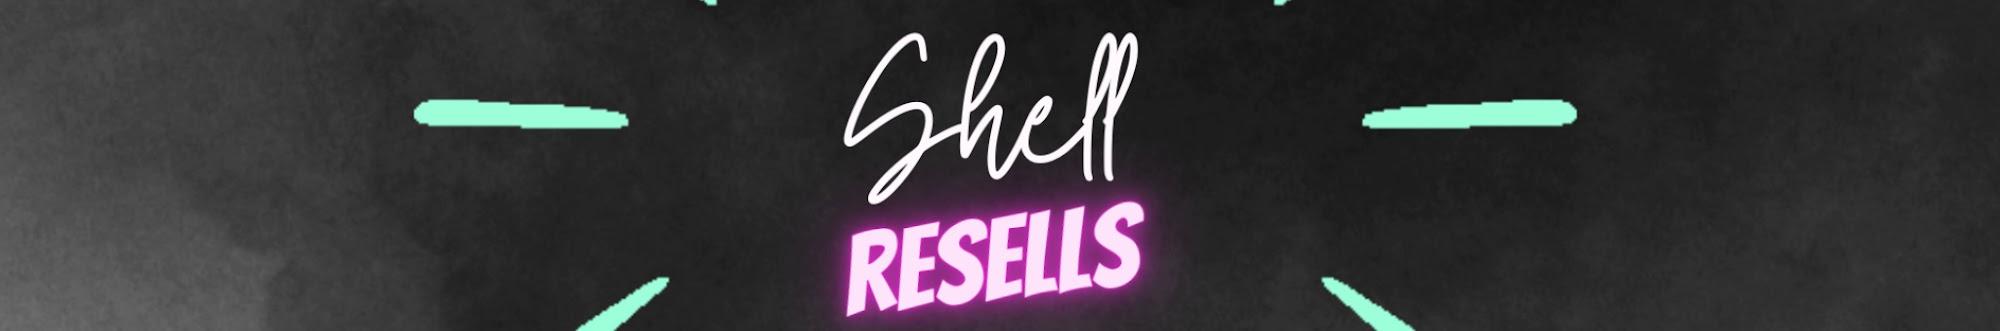 Shell Resells